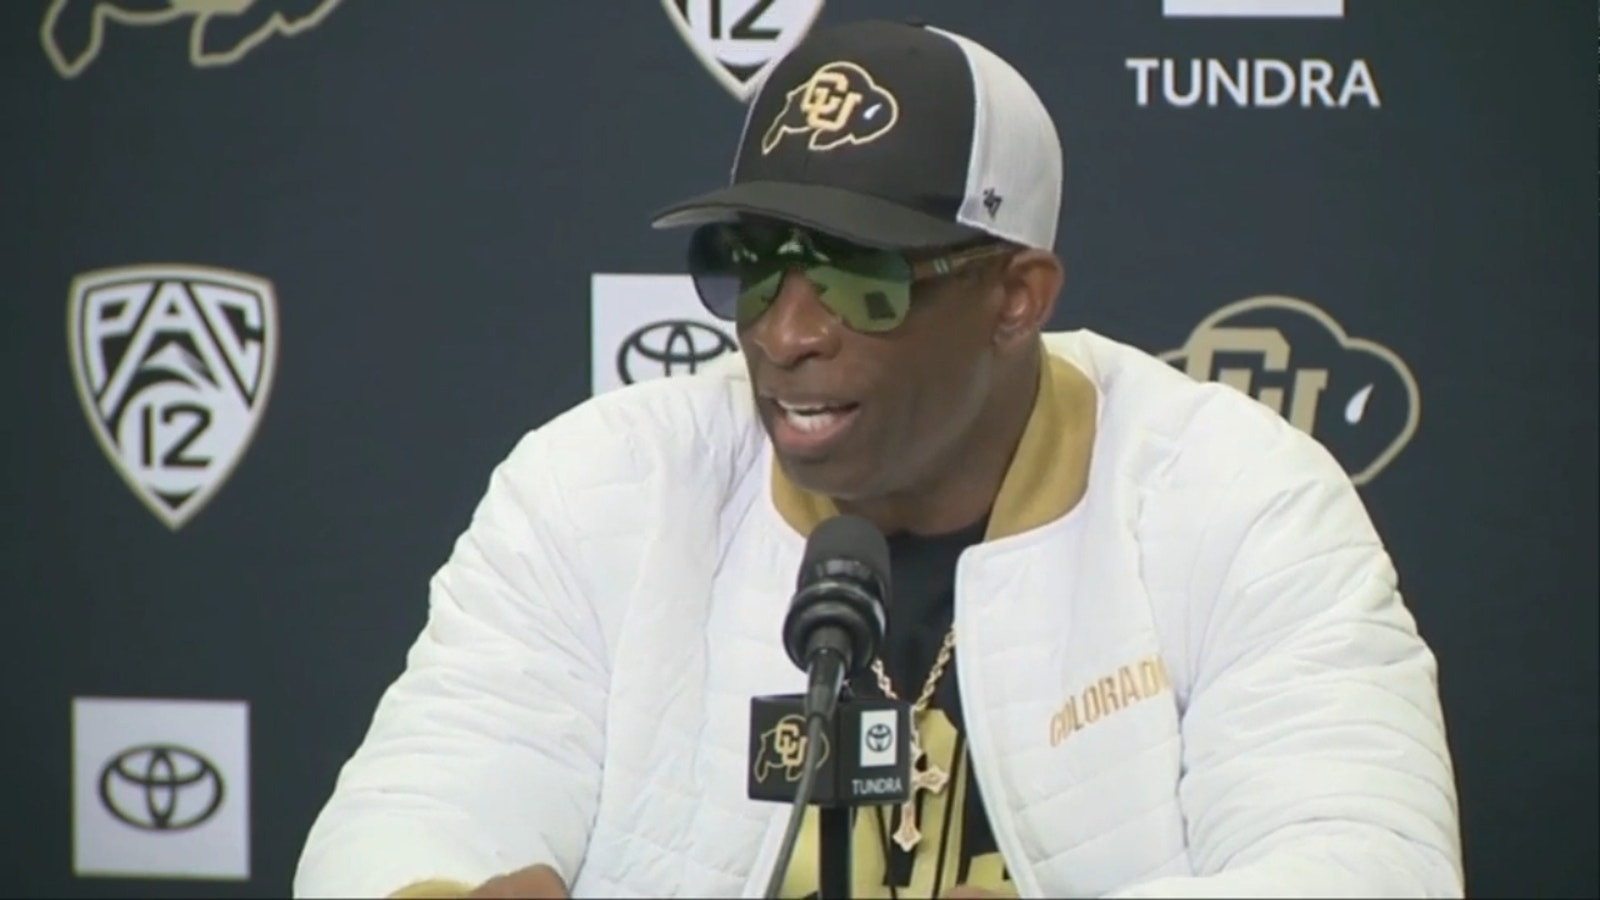 Press Conference: Colorado's Deion Sanders on Colorado State's Henry Blackburn receiving death threats and more 